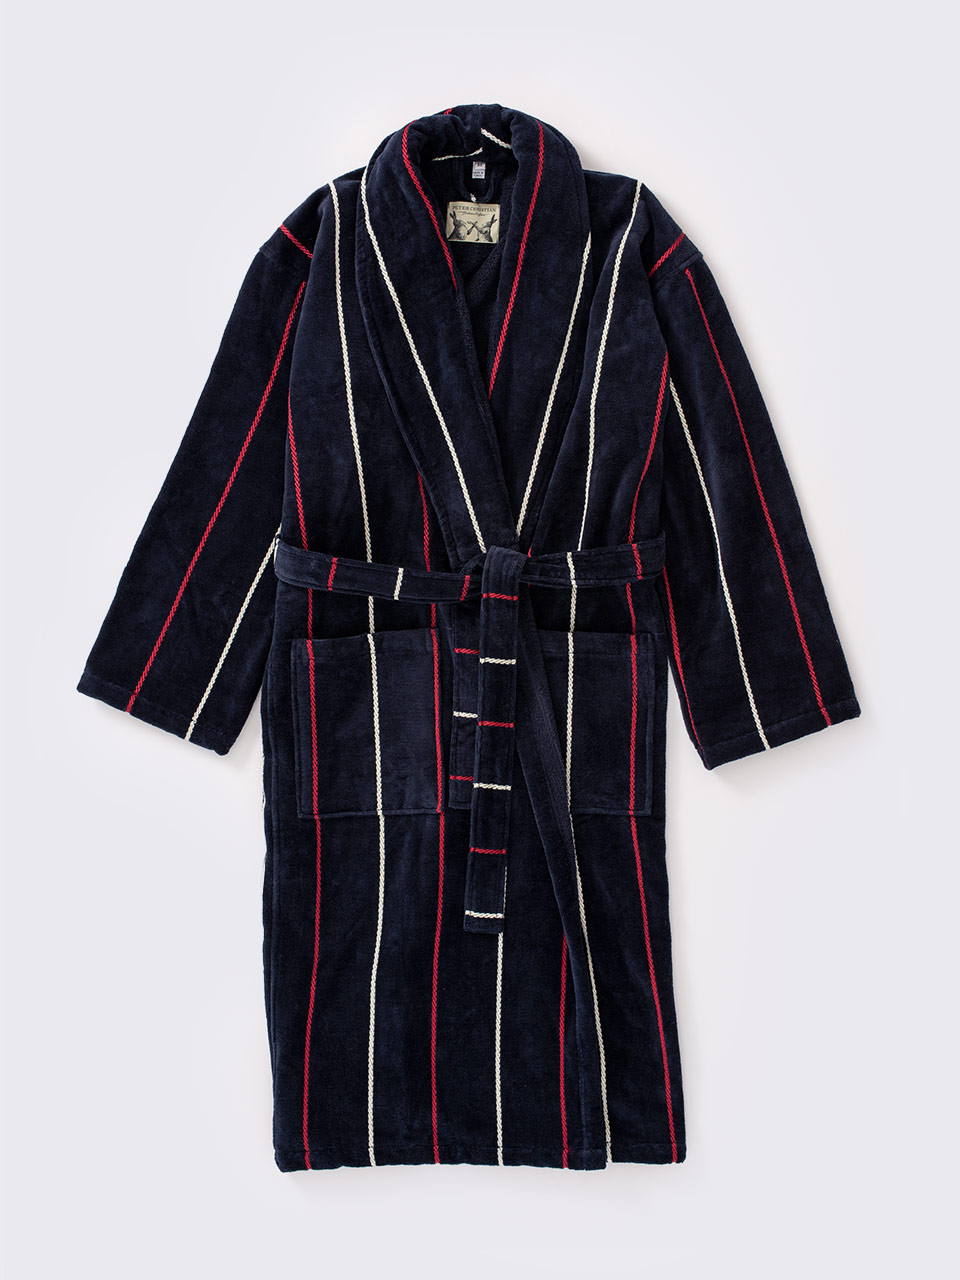 Men's Luxury Navy and Red Striped Velour Dressing Gown